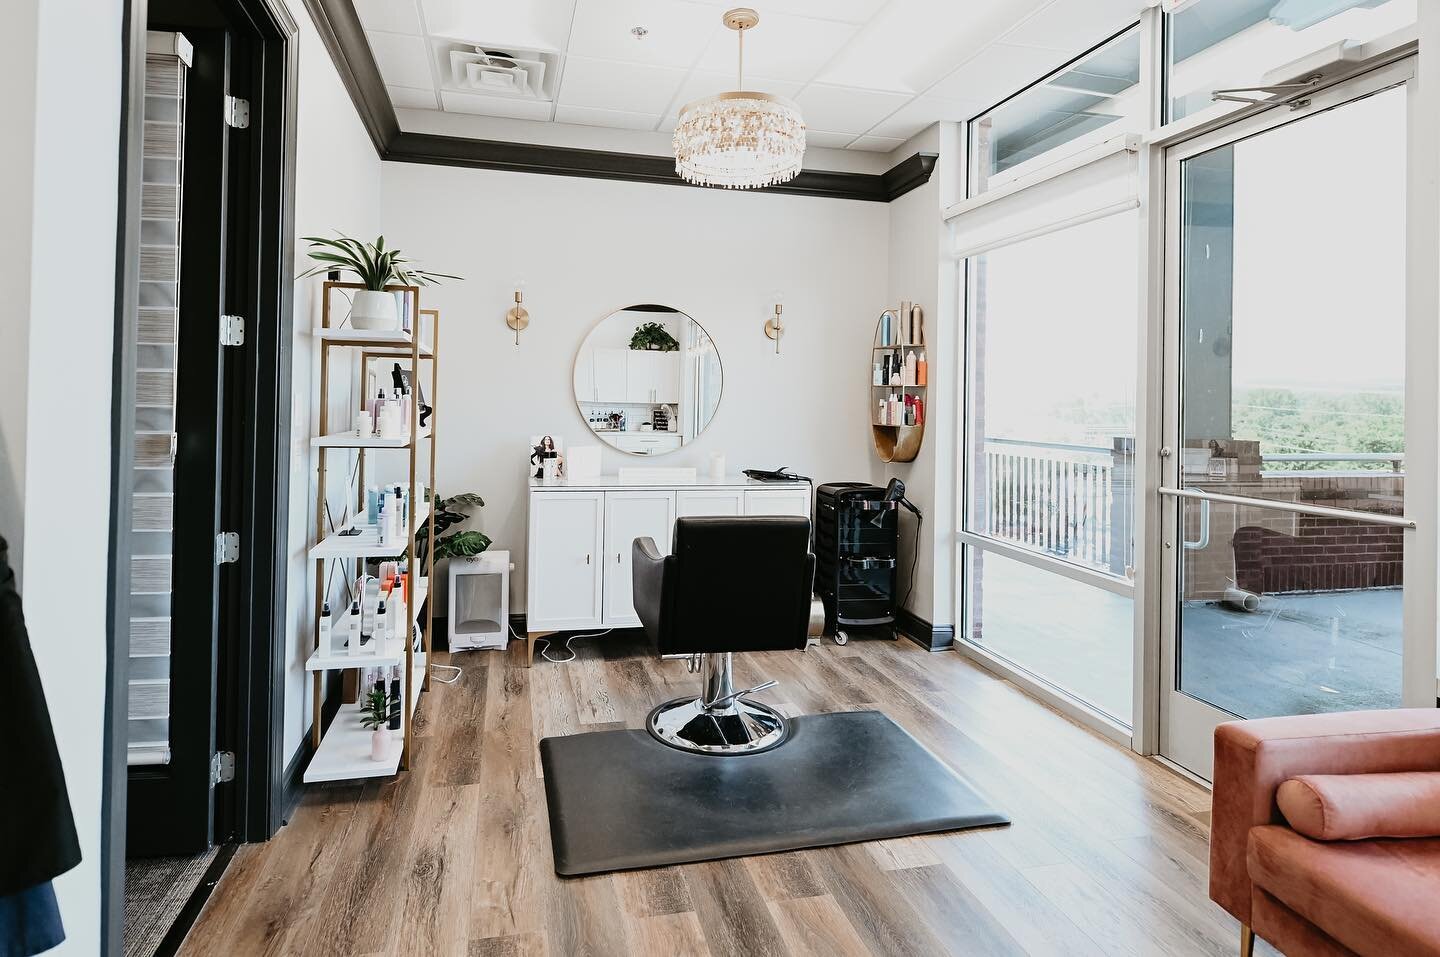 Upgrade your business! To schedule a luxury tour call or email us today!
jamiesprott@luxsalonsuites.net
615.857.9300
&bull;
&bull;
&bull;
&bull;
&bull;
&bull;
&bull;
&bull;
#luxsalonsuites #hairstyles #salonprofessional #cosmetology #blondes #beachwa